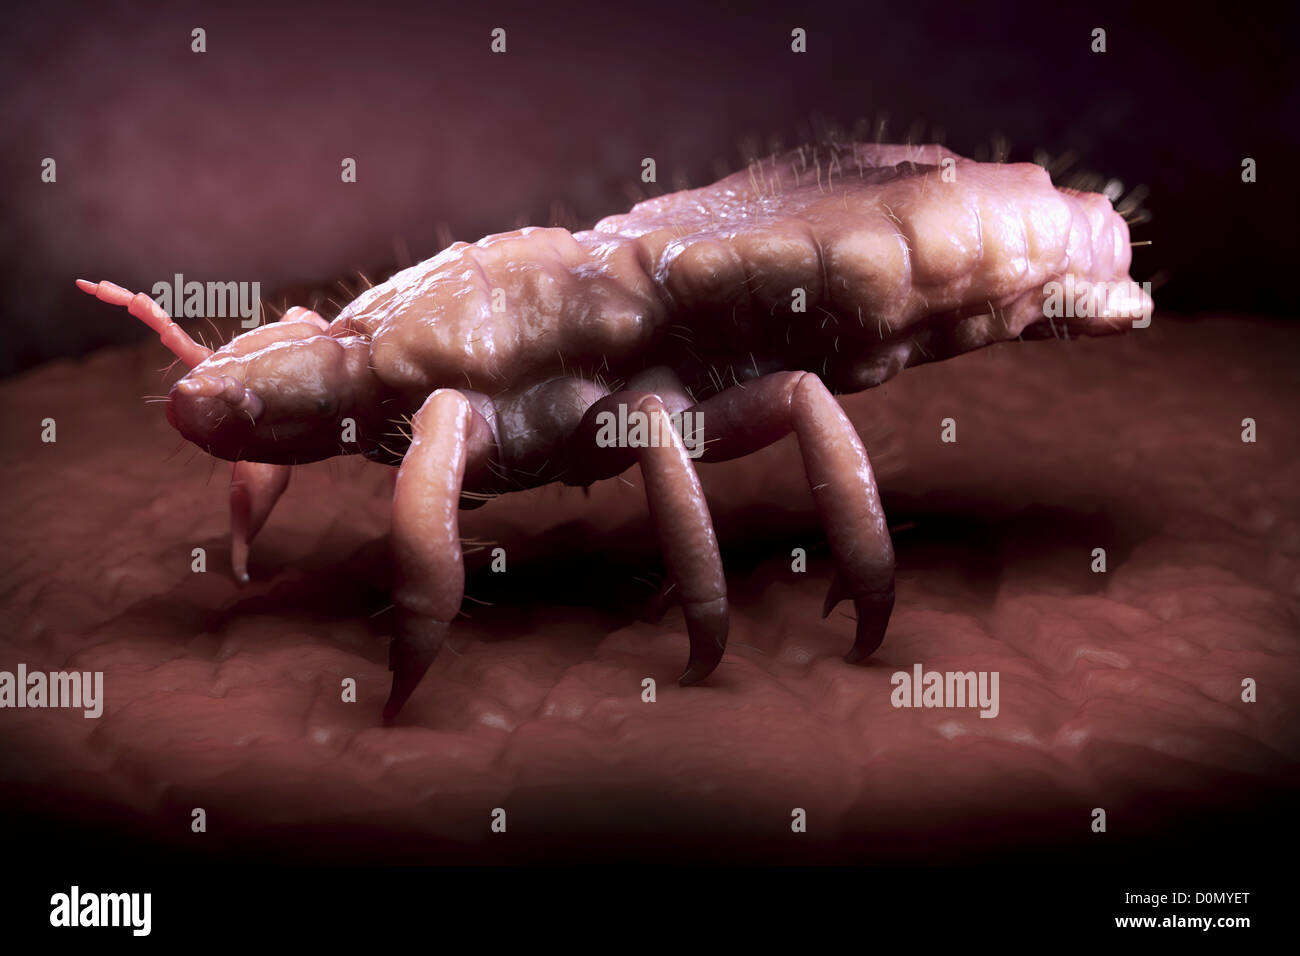 A close up view of a single head louse. Stock Photo